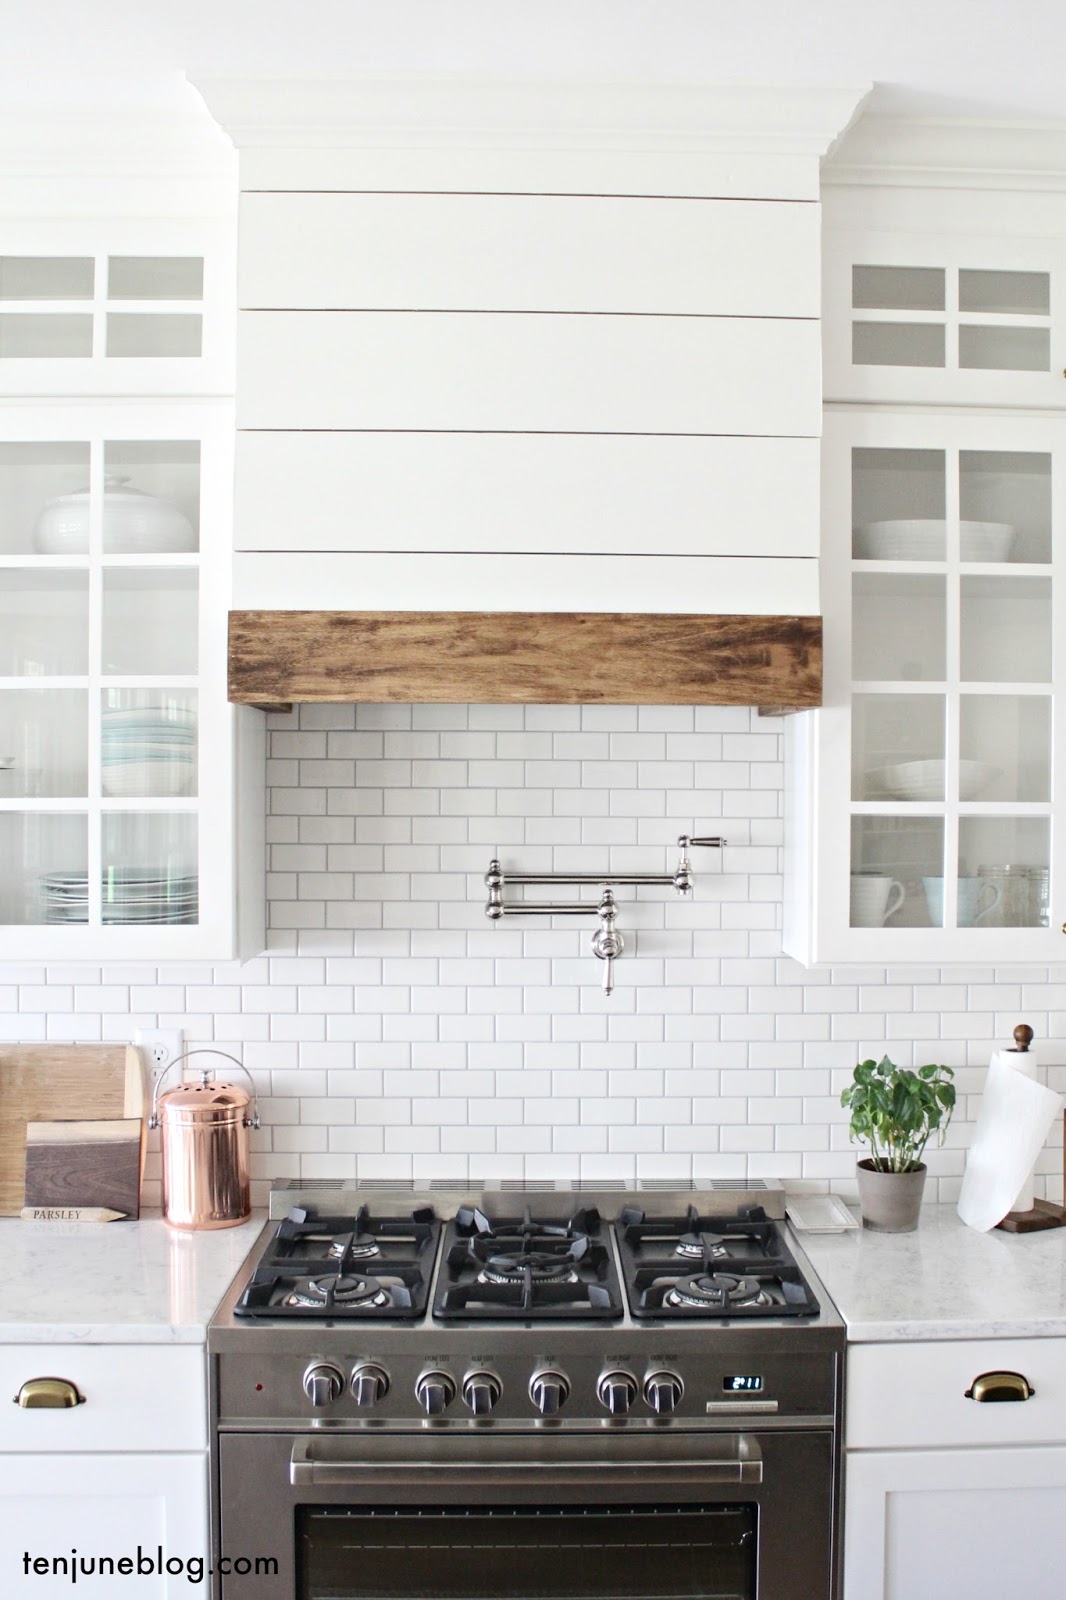 7 Kitchen Ideas to Love - Make your kitchen beautiful and efficient.